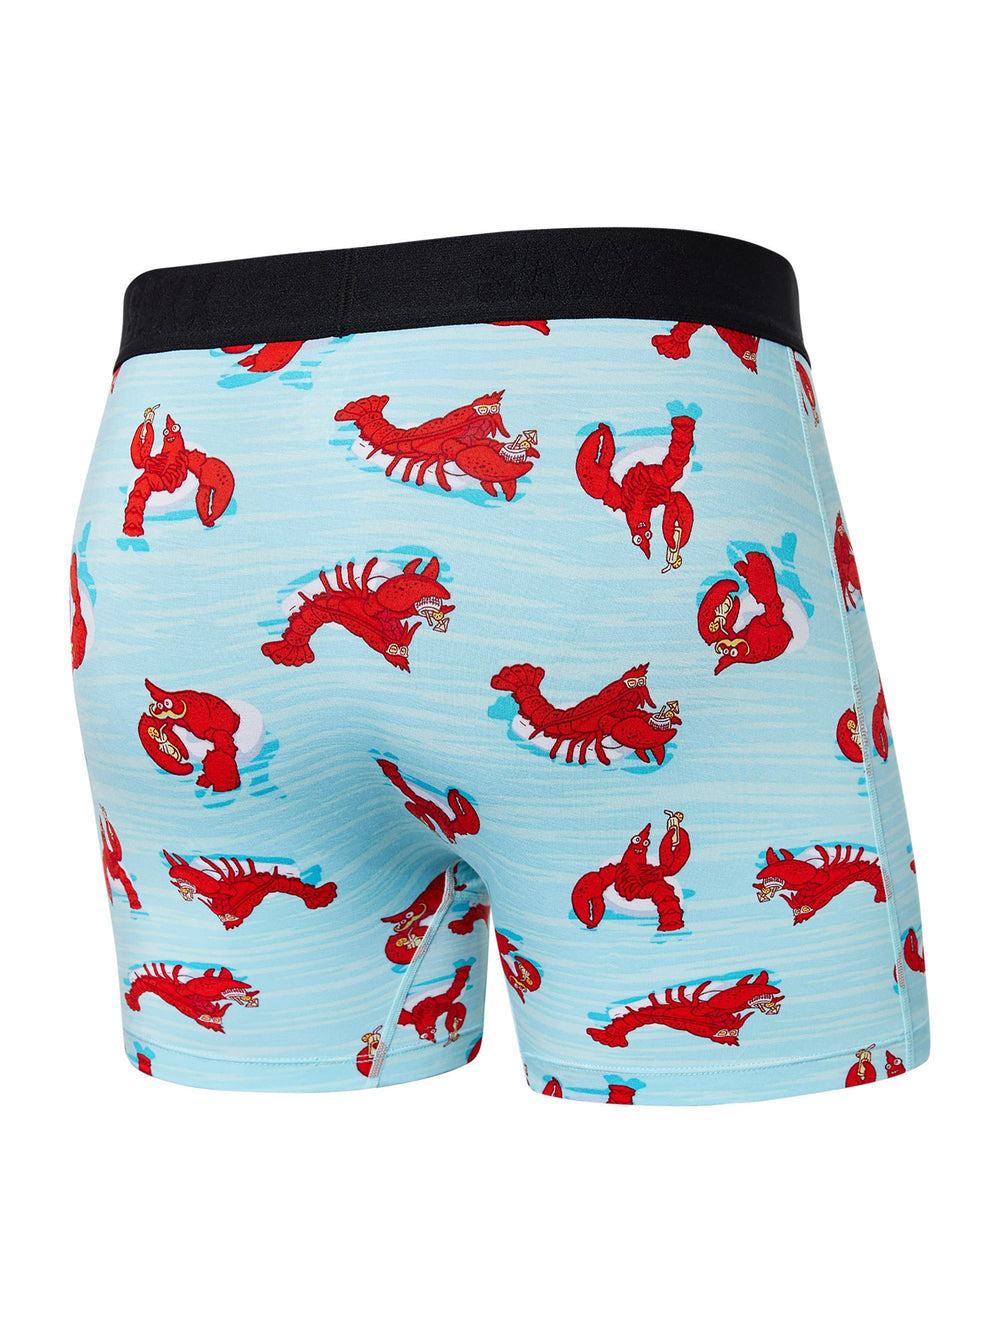 SAXX ULTRA BOXER BRIEF- LOBSTER LOUNGE  - CLEARANCE